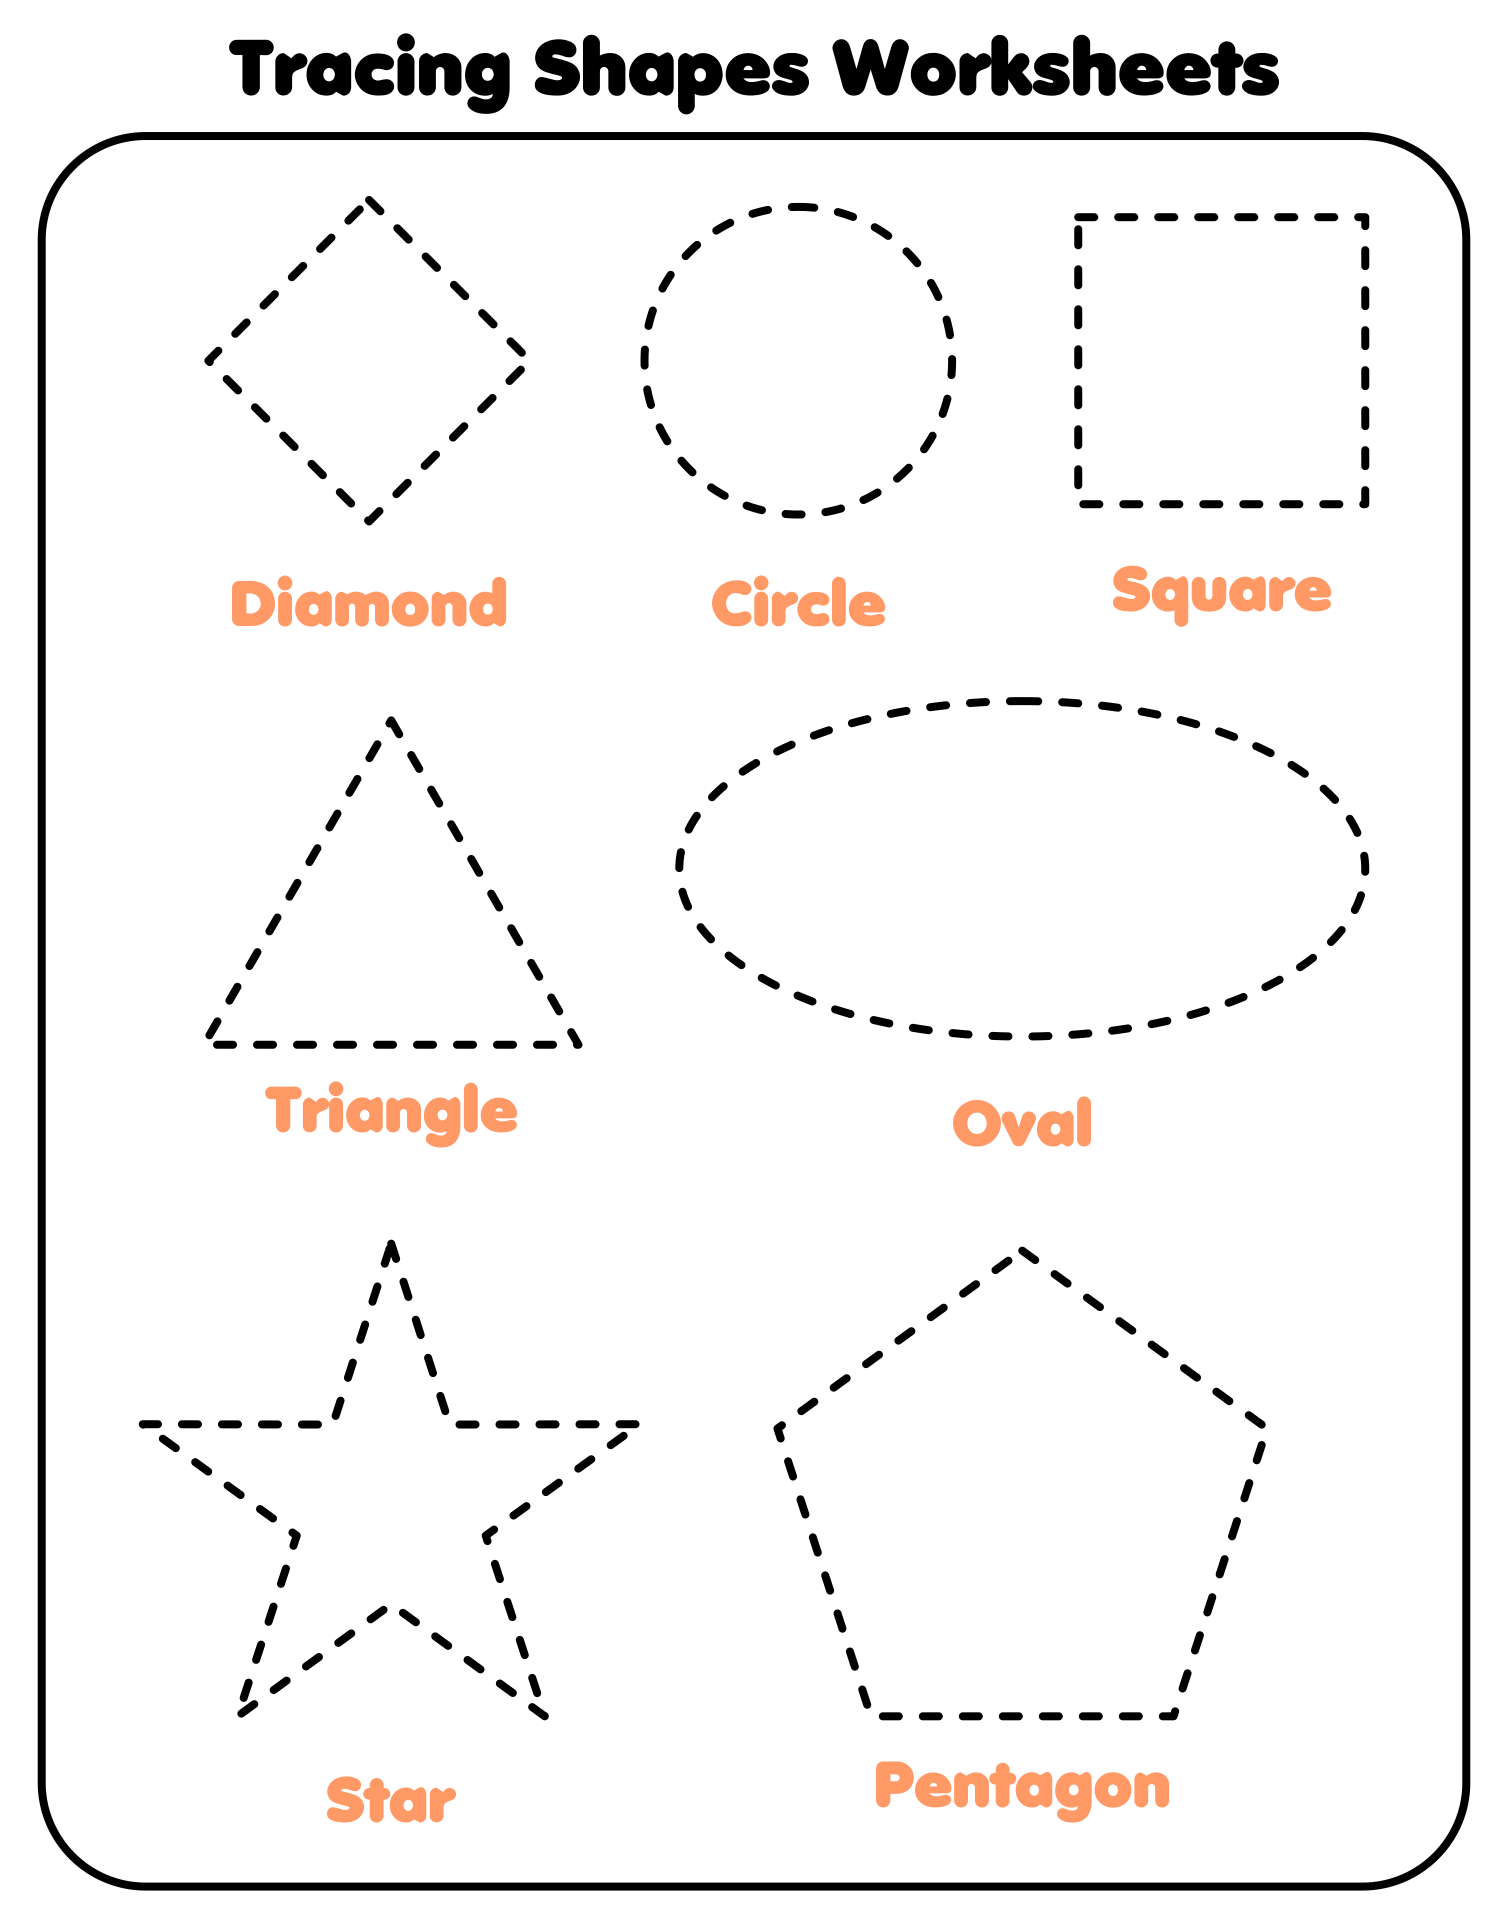 pre-k-tracing-shapes-worksheets-1000-images-about-shapes-free